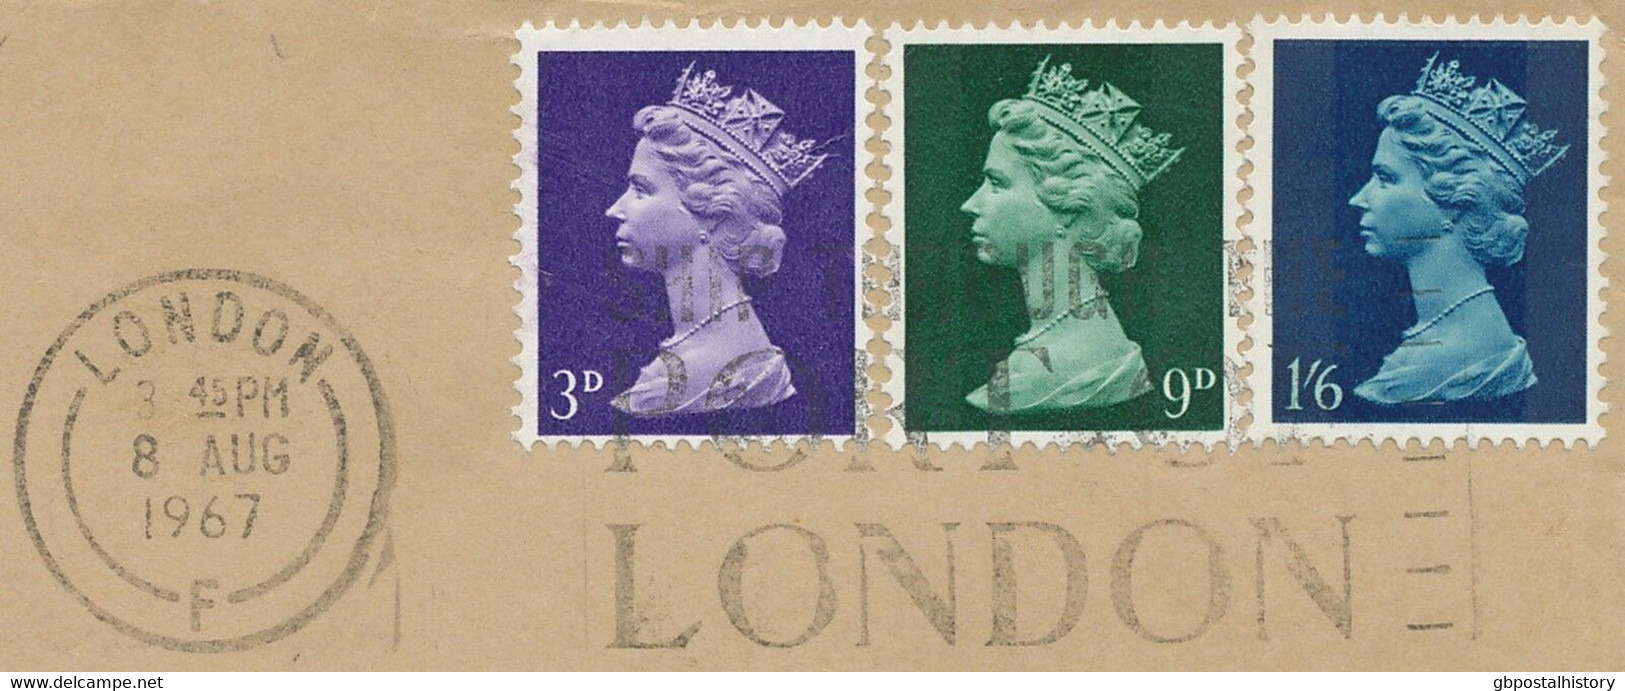 GB 1967 Machin 3D, 9D And 1 Sh. 6D FDC LONDON - SHIP THROUGH THE PORT OF LONDON - 1952-1971 Pre-Decimale Uitgaves